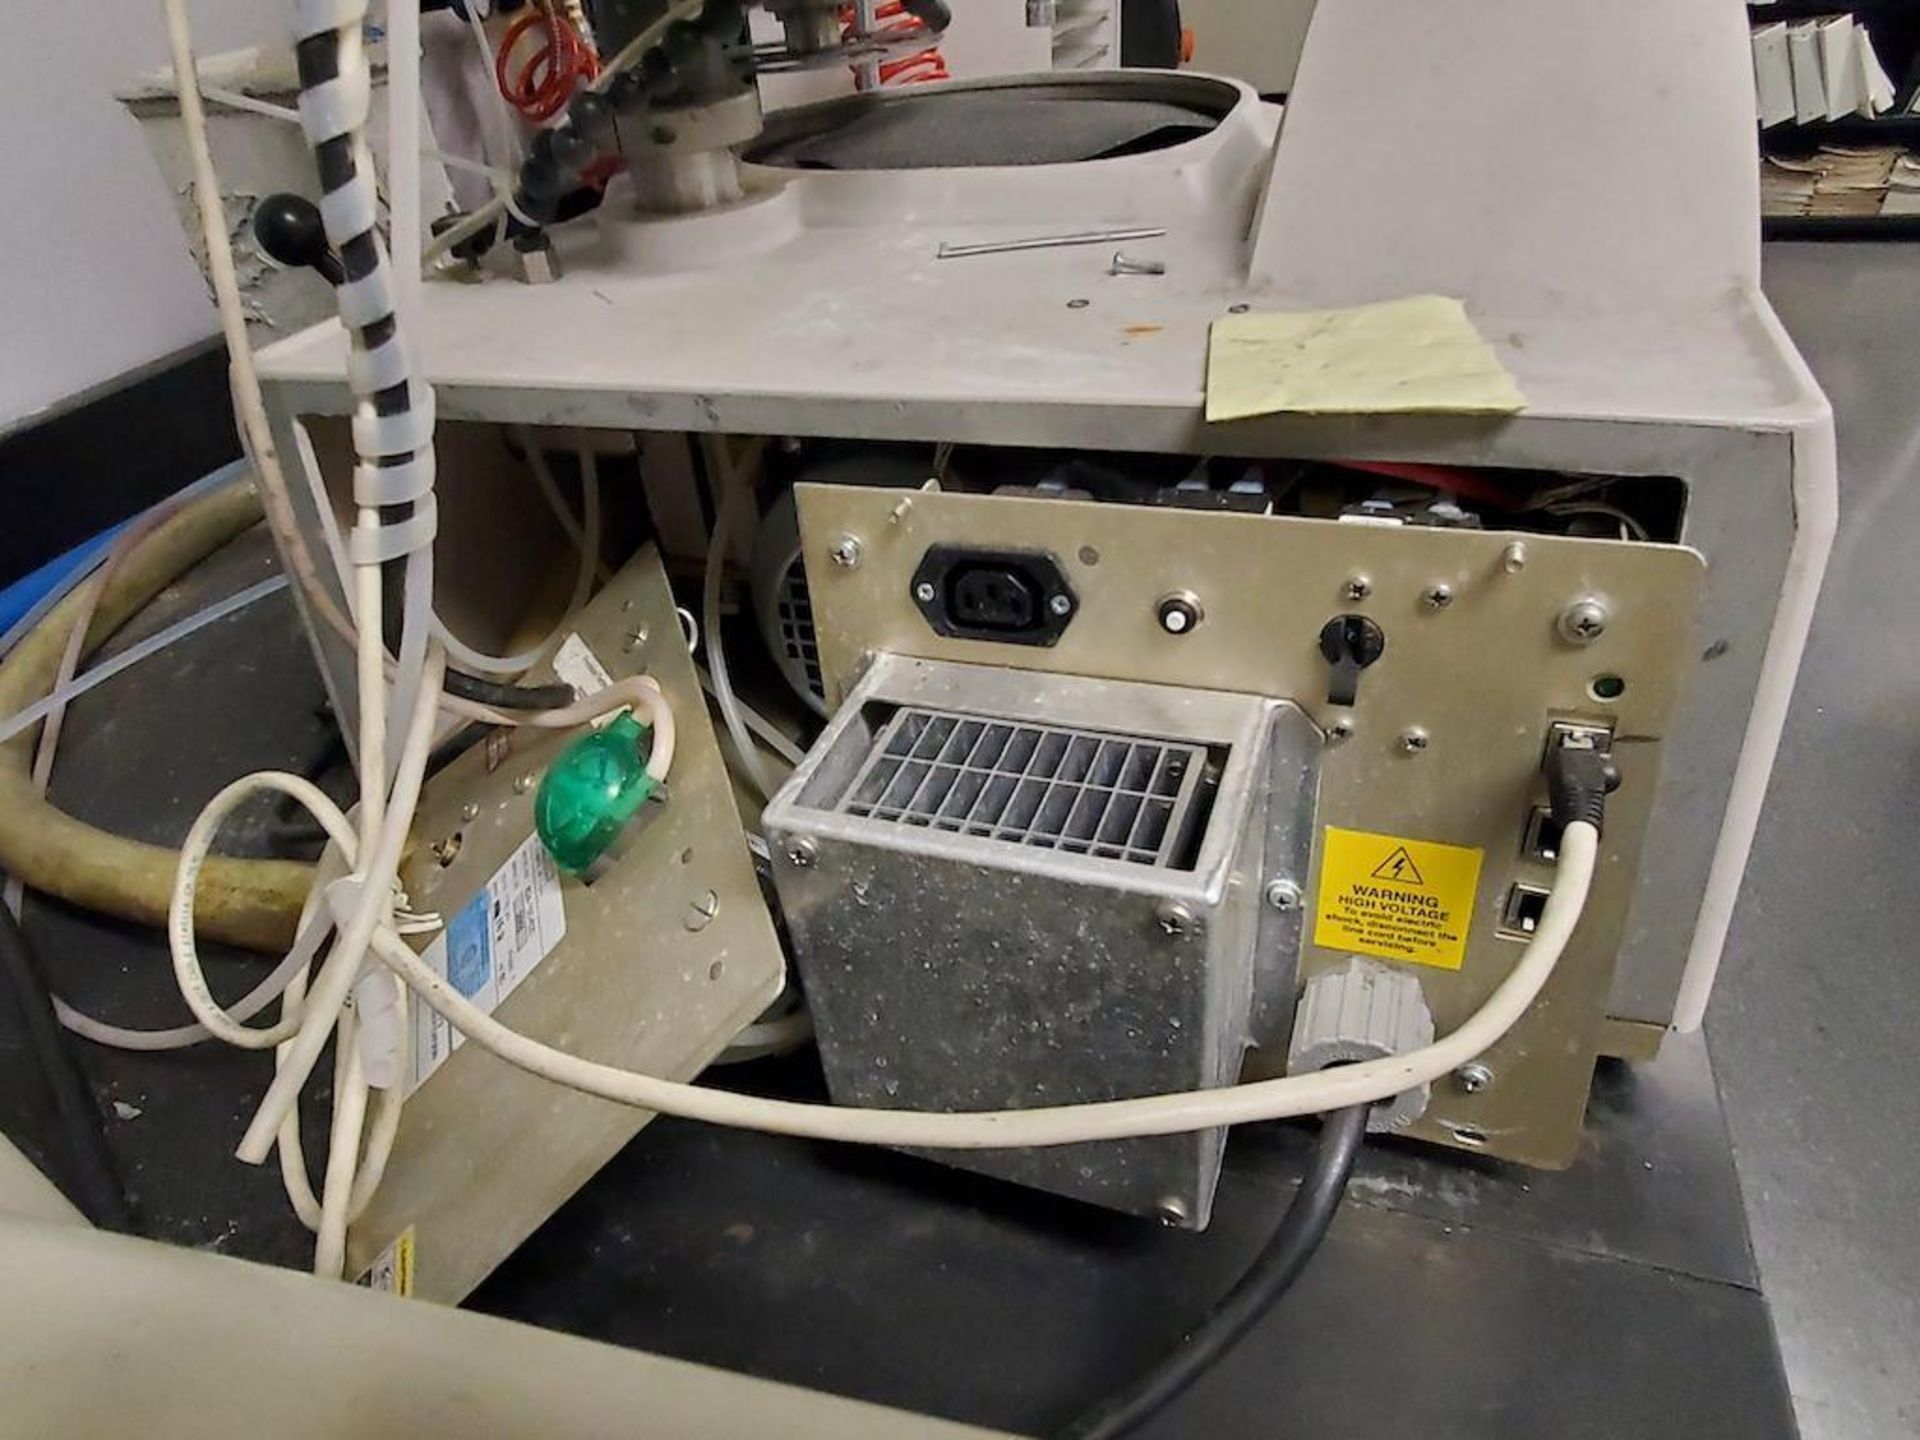 LECO PRECISION GRINDER, MODEL 824-100-600, SN 3005, NOTE: PANELS OPEN MAY NEED REPAIR [UPSTAIRS LAB] - Image 2 of 4